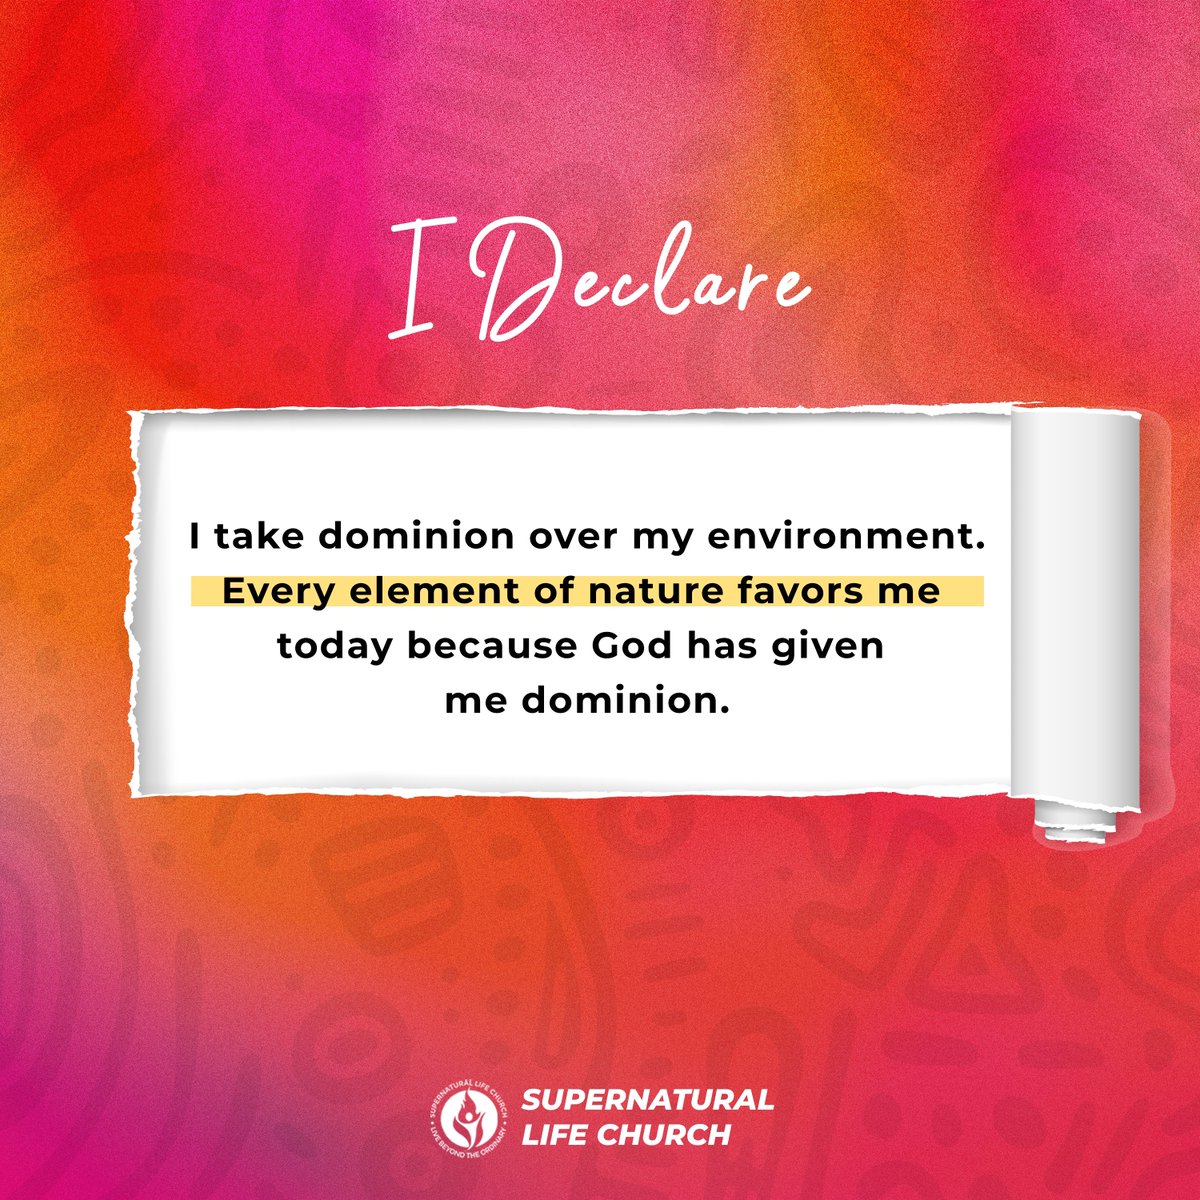 Speak over your day!
Share this with someone you pray this for. 

#dailydeclaration
#ouryearofdominion
#theslcexperience
#slcfamilyworldwide
#supernaturallifechurch